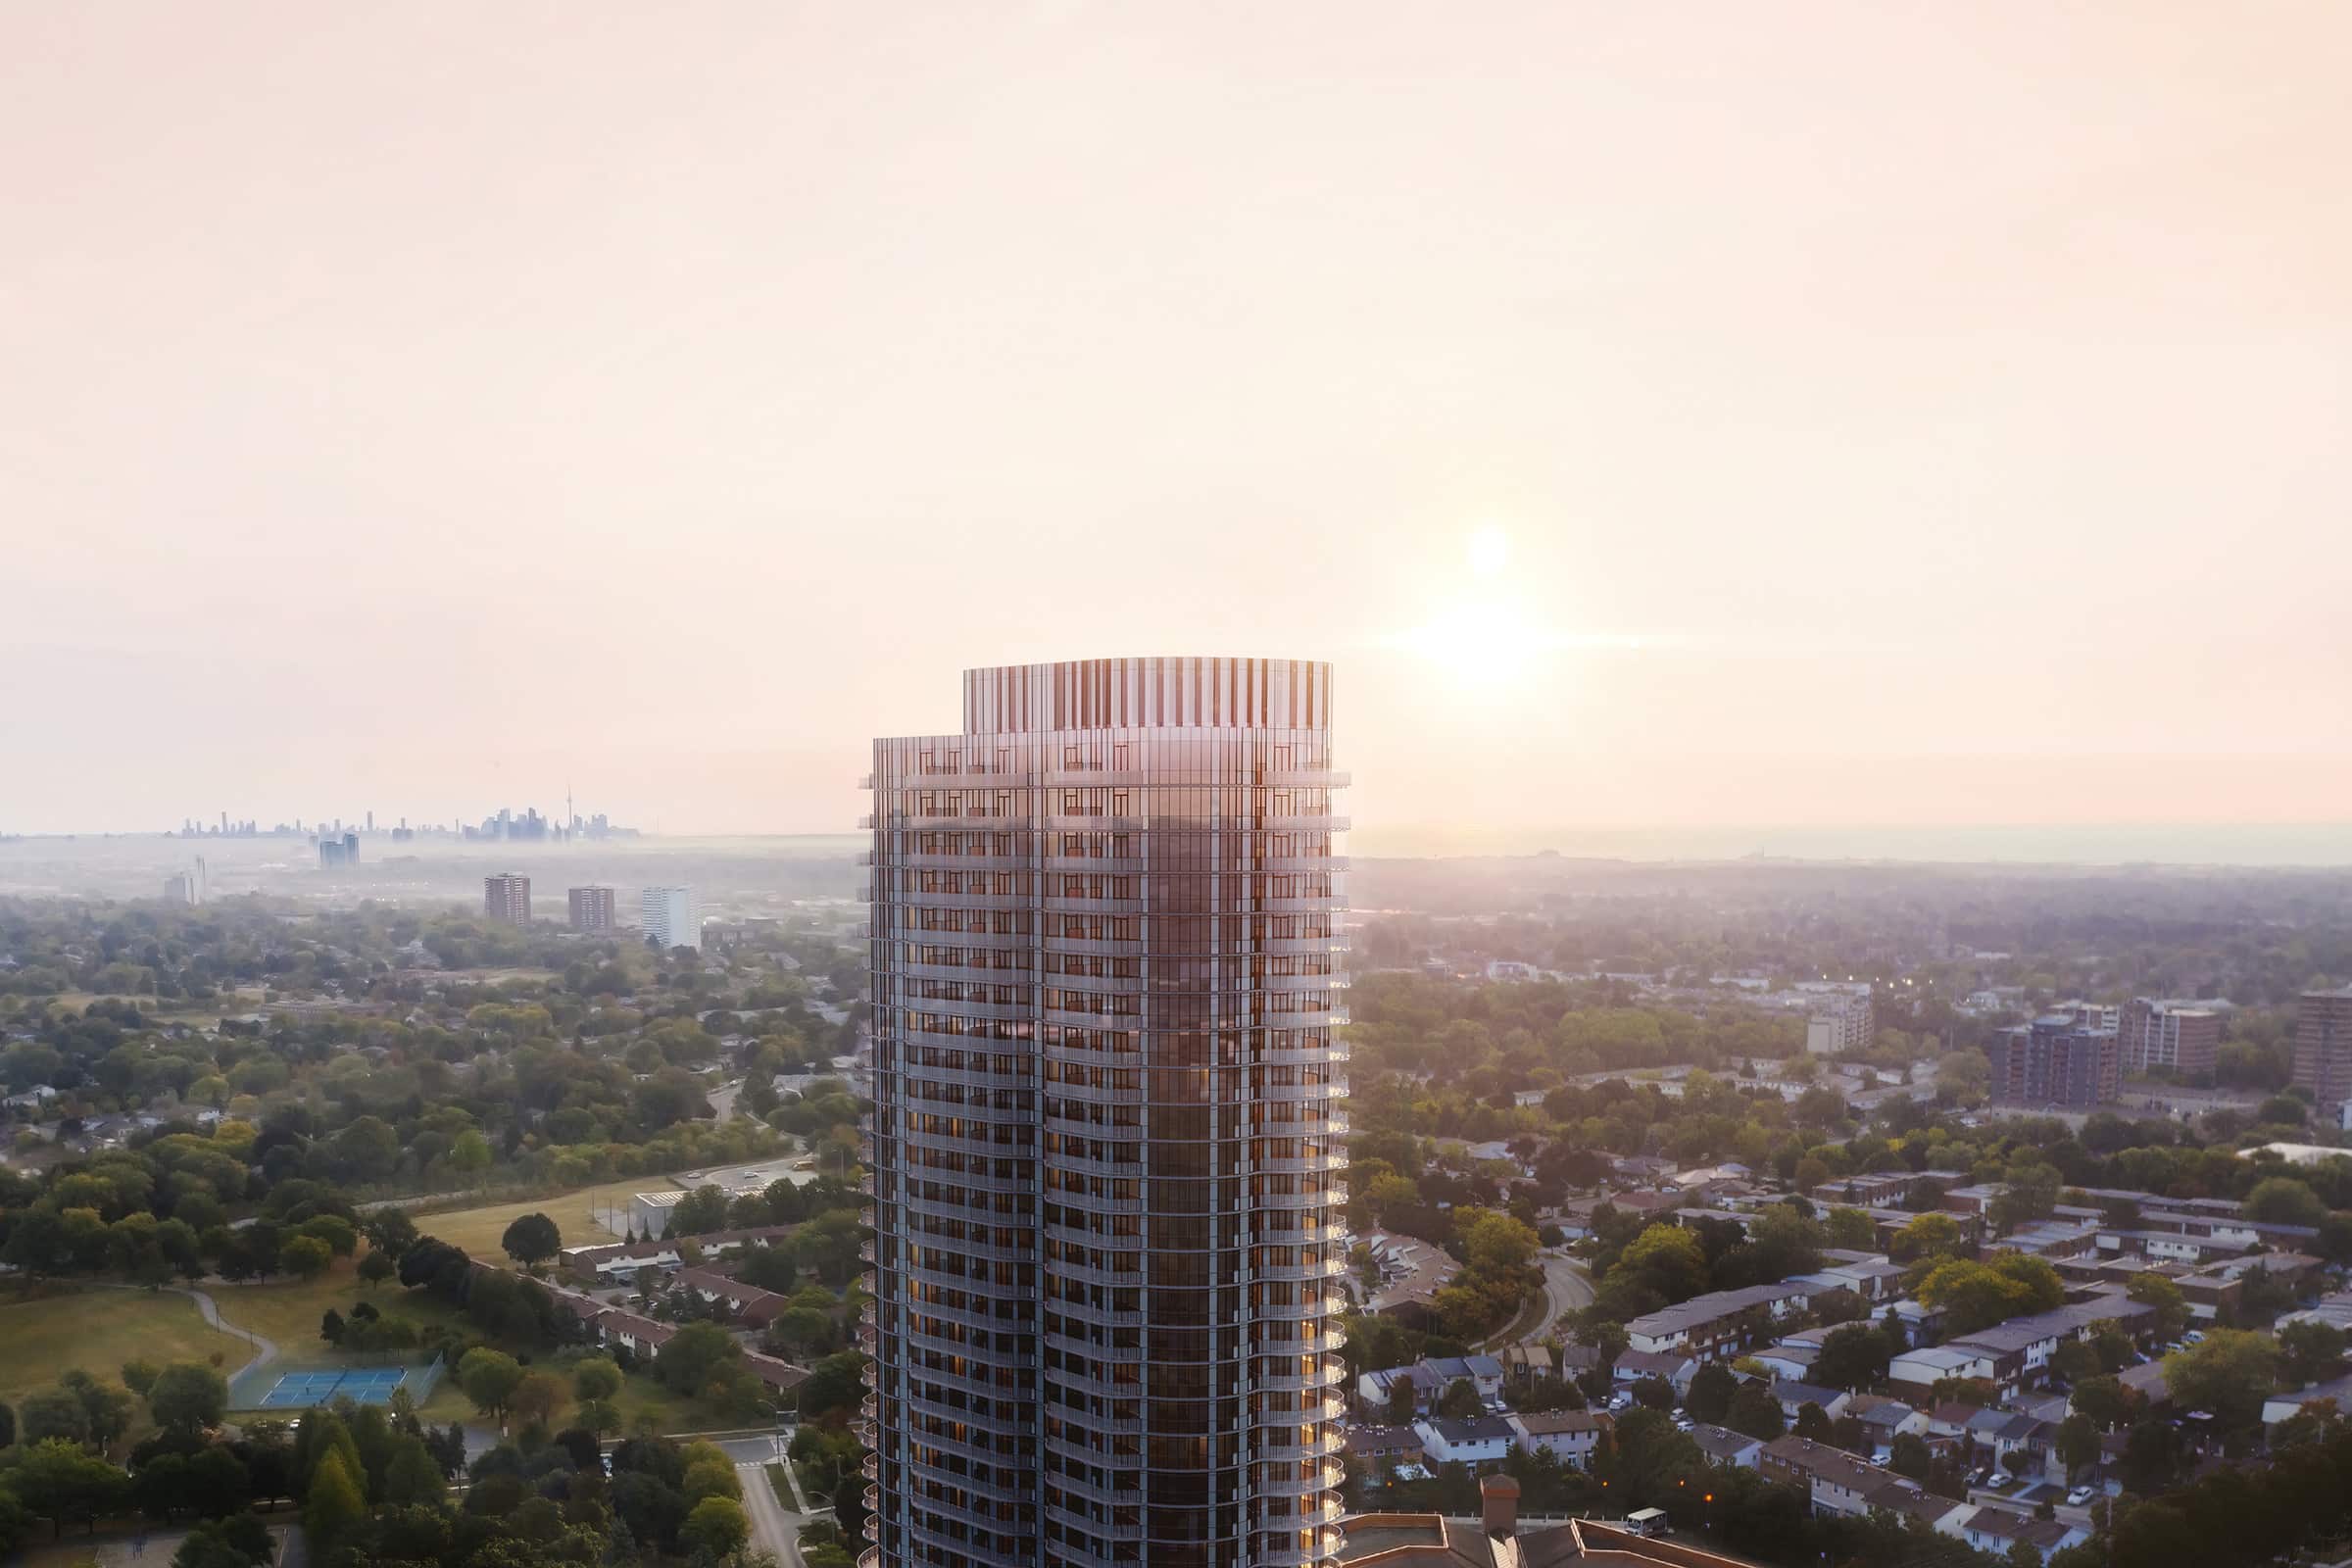 [object object] Downtown Mississauga New Condos For Sale alba condos 1 fairview rd e mississauga hurontario lrt